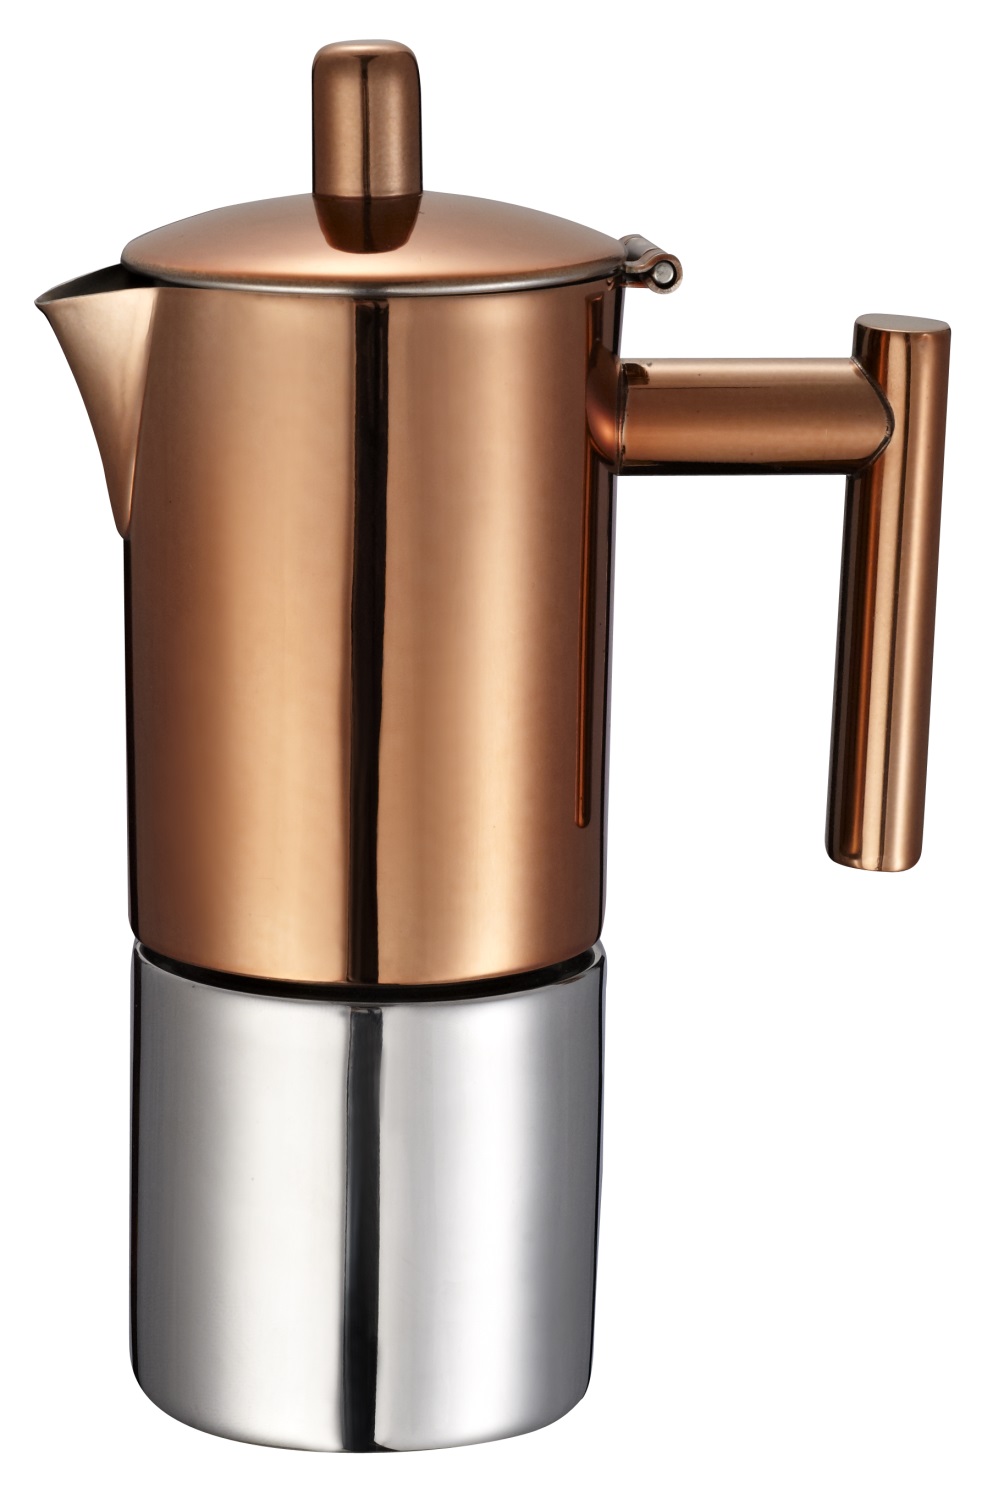 Stainless Steel Stovetop Espresso Maker/coffee maker